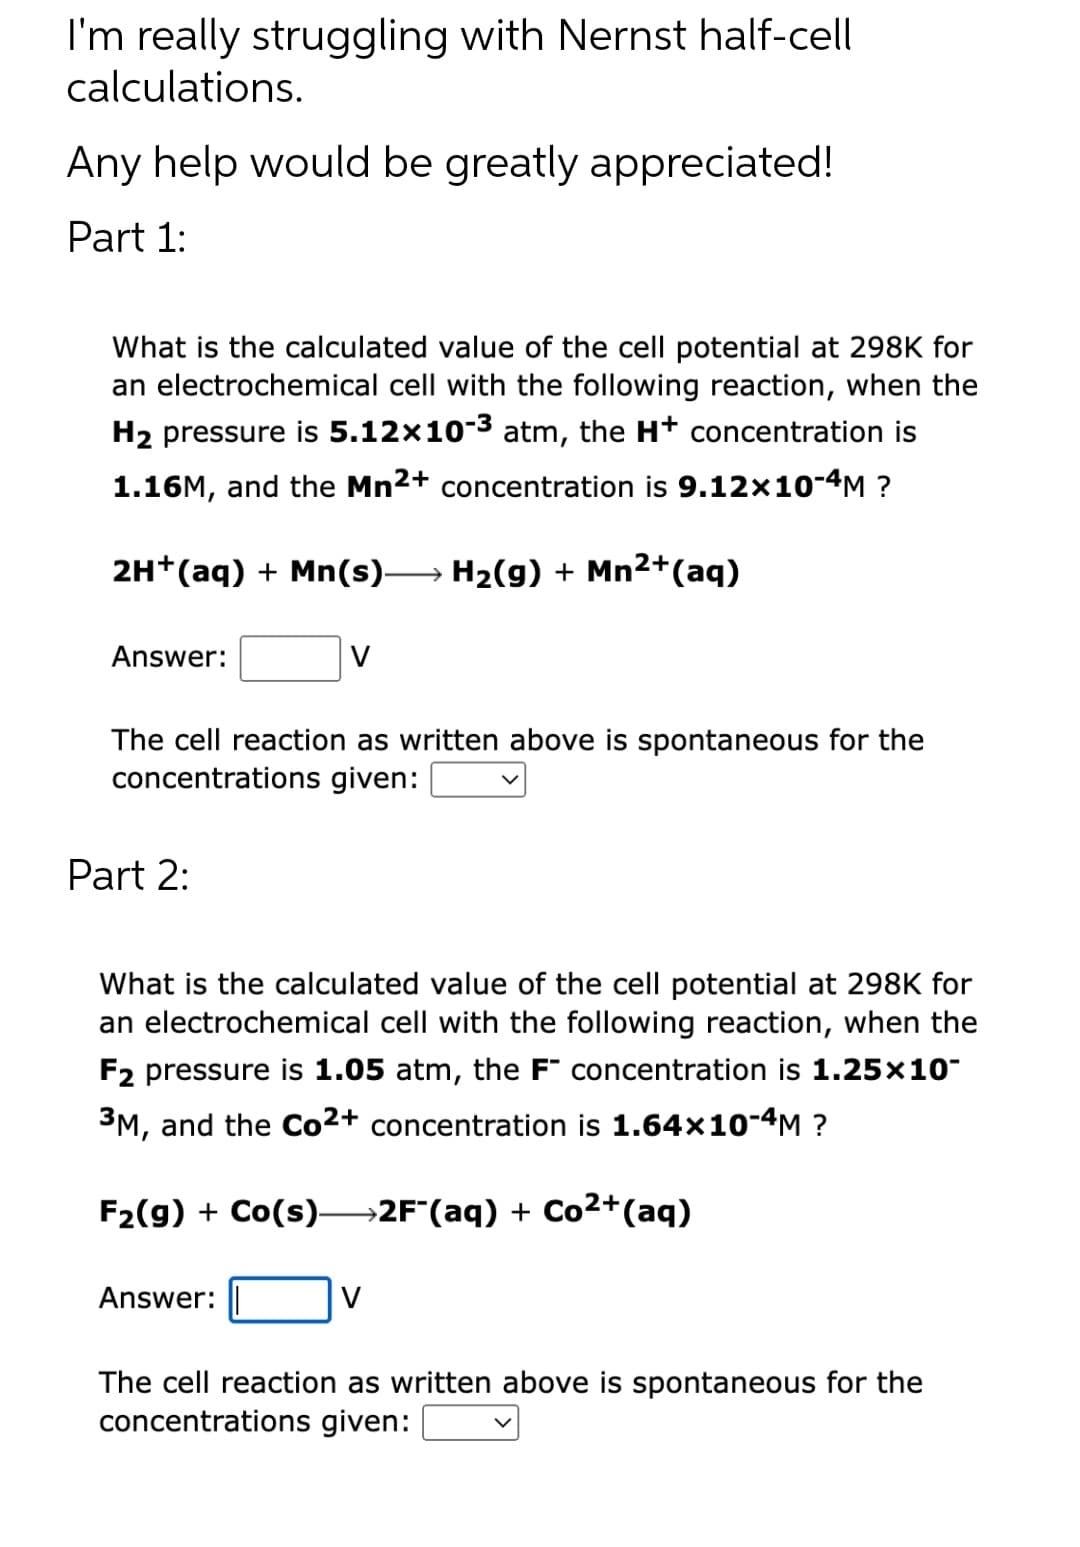 I'm really struggling with Nernst half-cell
calculations.
Any help would be greatly appreciated!
Part 1:
What is the calculated value of the cell potential at 298K for
an electrochemical cell with the following reaction, when the
H₂ pressure is 5.12×10-³ atm, the H+ concentration is
1.16M, and the Mn2+ concentration is 9.12×10-4M ?
2H+ (aq) + Mn(s)→→→→→ H₂(g) + Mn²+(aq)
Answer:
The cell reaction as written above is spontaneous for the
concentrations given:
Part 2:
V
What is the calculated value of the cell potential at 298K for
an electrochemical cell with the following reaction, when the
F2 pressure is 1.05 atm, the F concentration is 1.25x10-
3M, and the Co2+ concentration is 1.64x10-4M ?
F₂(g) + Co(s)—2F¯(aq) + Co²+ (aq)
Answer:
The cell reaction as written above is spontaneous for the
concentrations given: